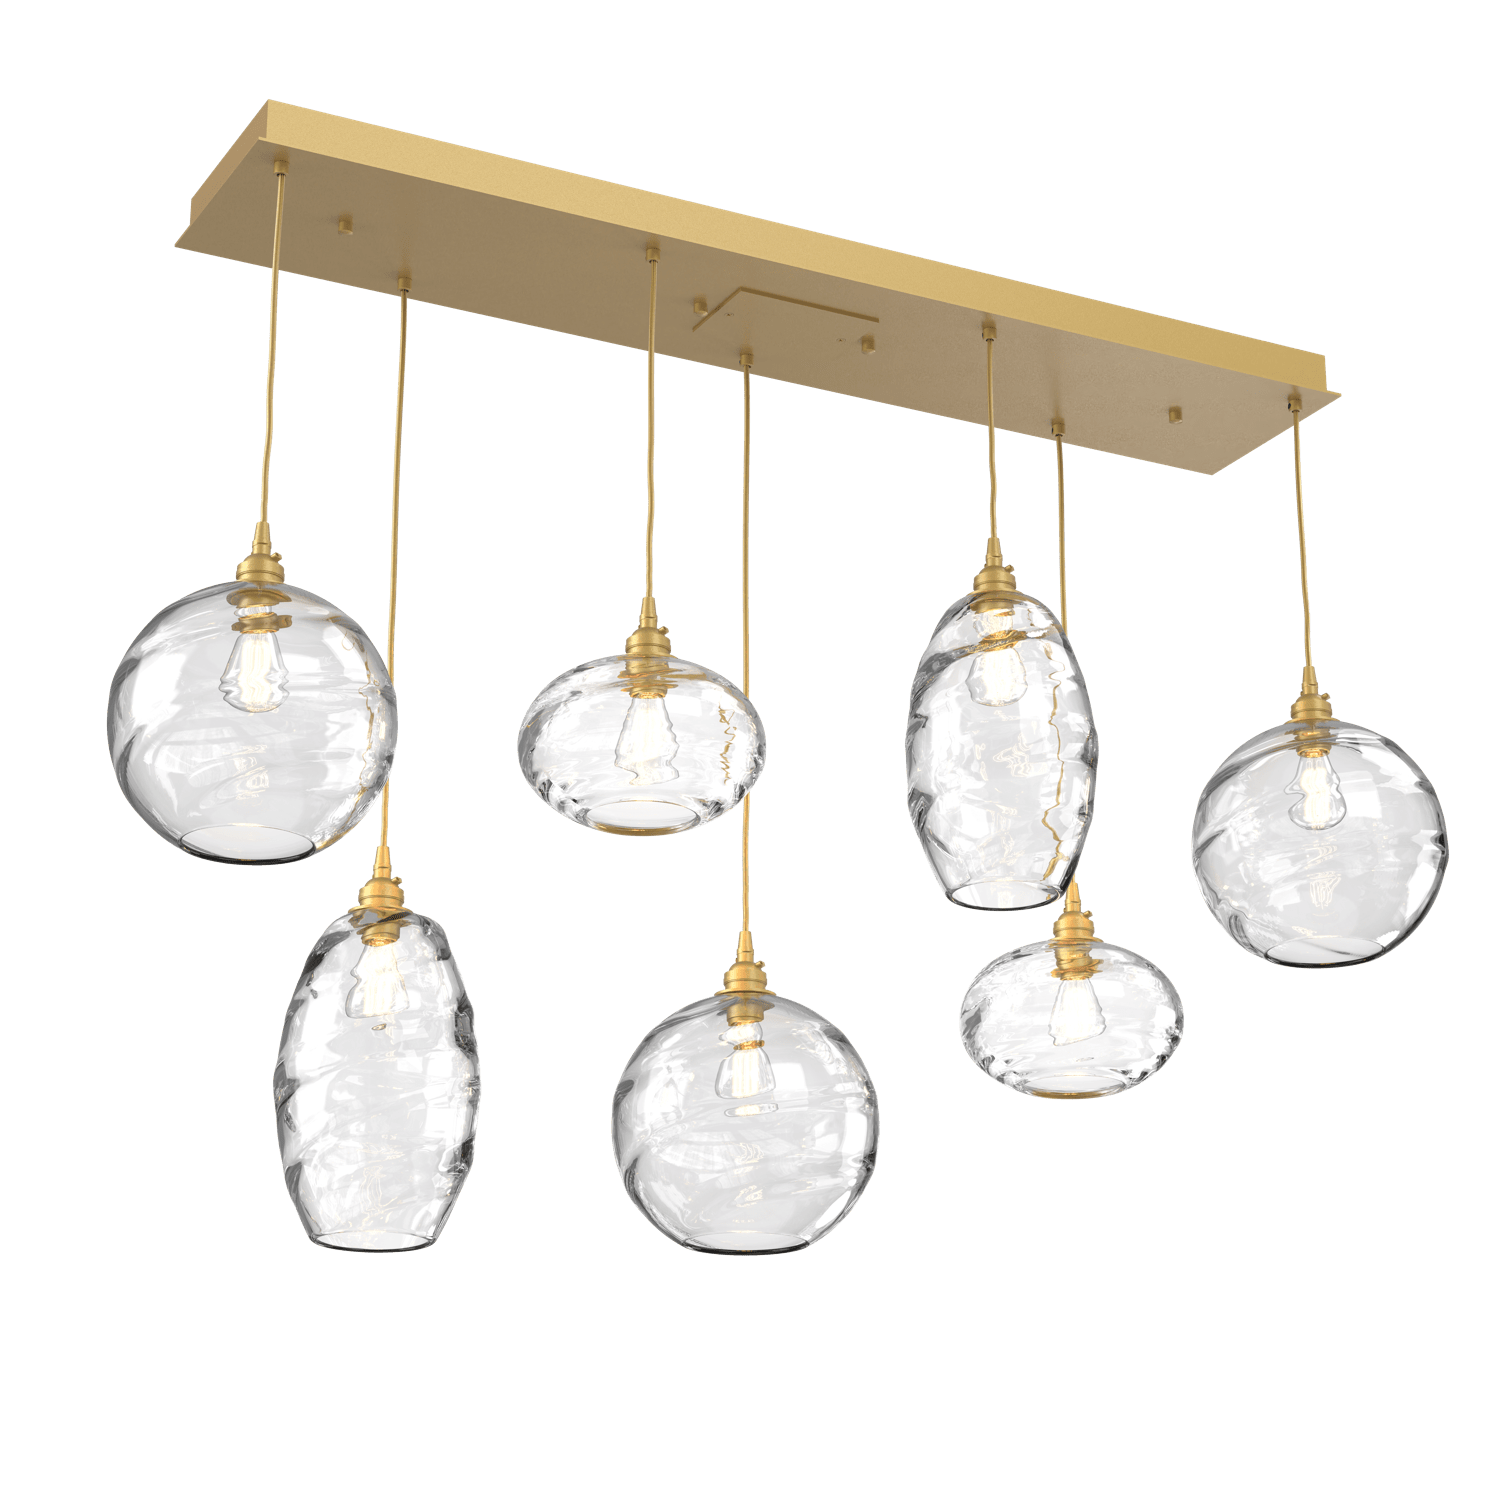 PLB0048-07-GB-OC-Hammerton-Studio-Optic-Blown-Glass-Misto-7-light-linear-pendant-chandelier-with-gilded-brass-finish-and-optic-clear-blown-glass-shades-and-incandescent-lamping